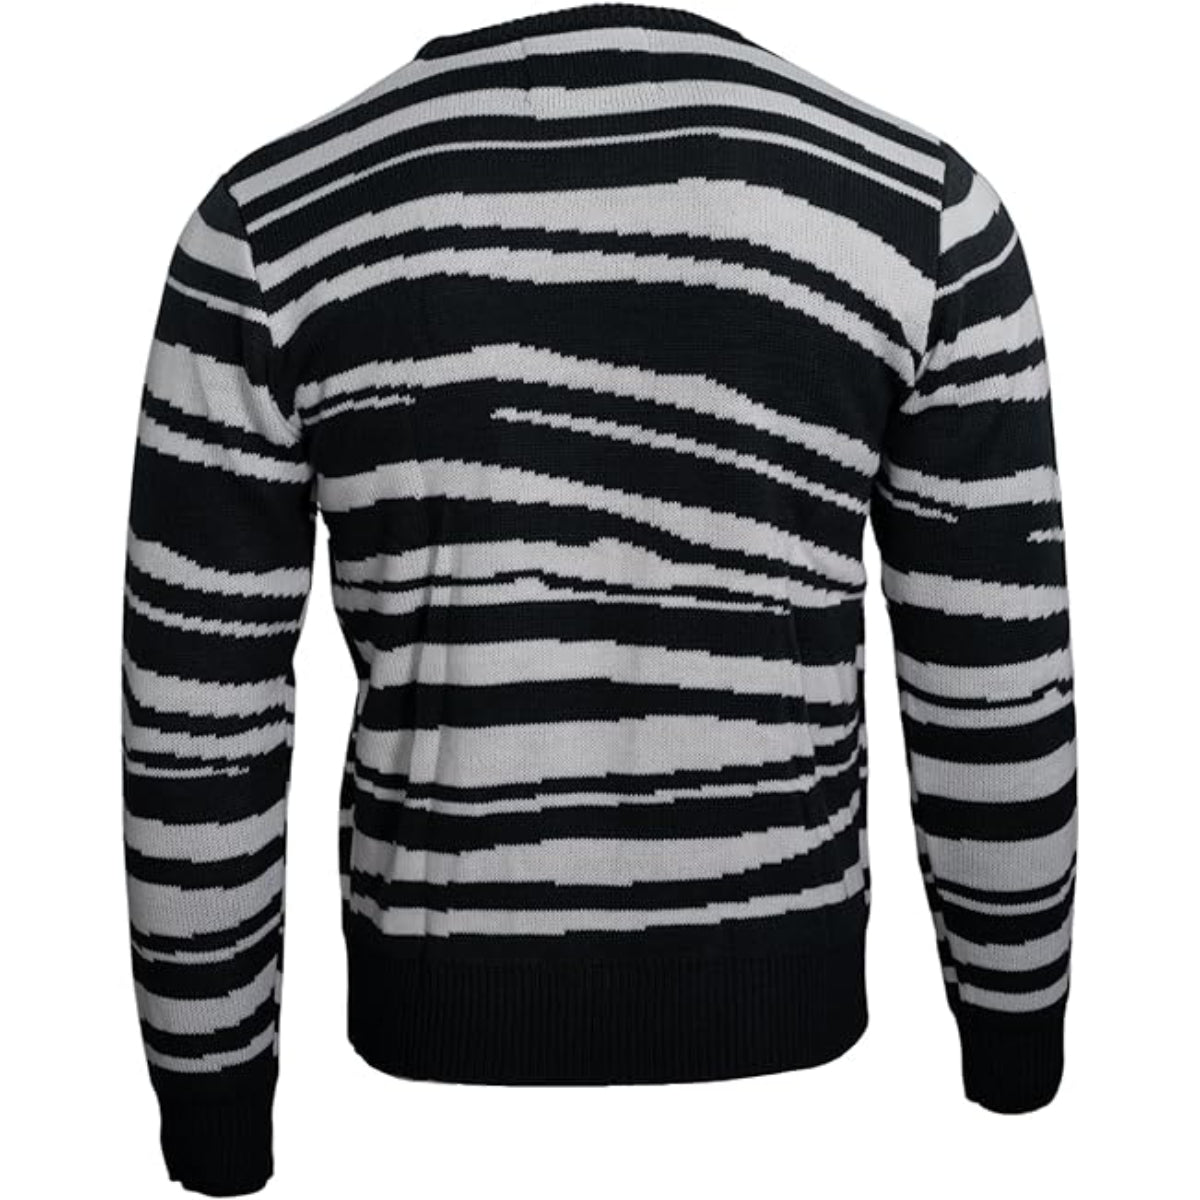 Pugley Spooky Black and White Sweater for Cosplay Perfect for Your Spooky Family Halloween Costume Back